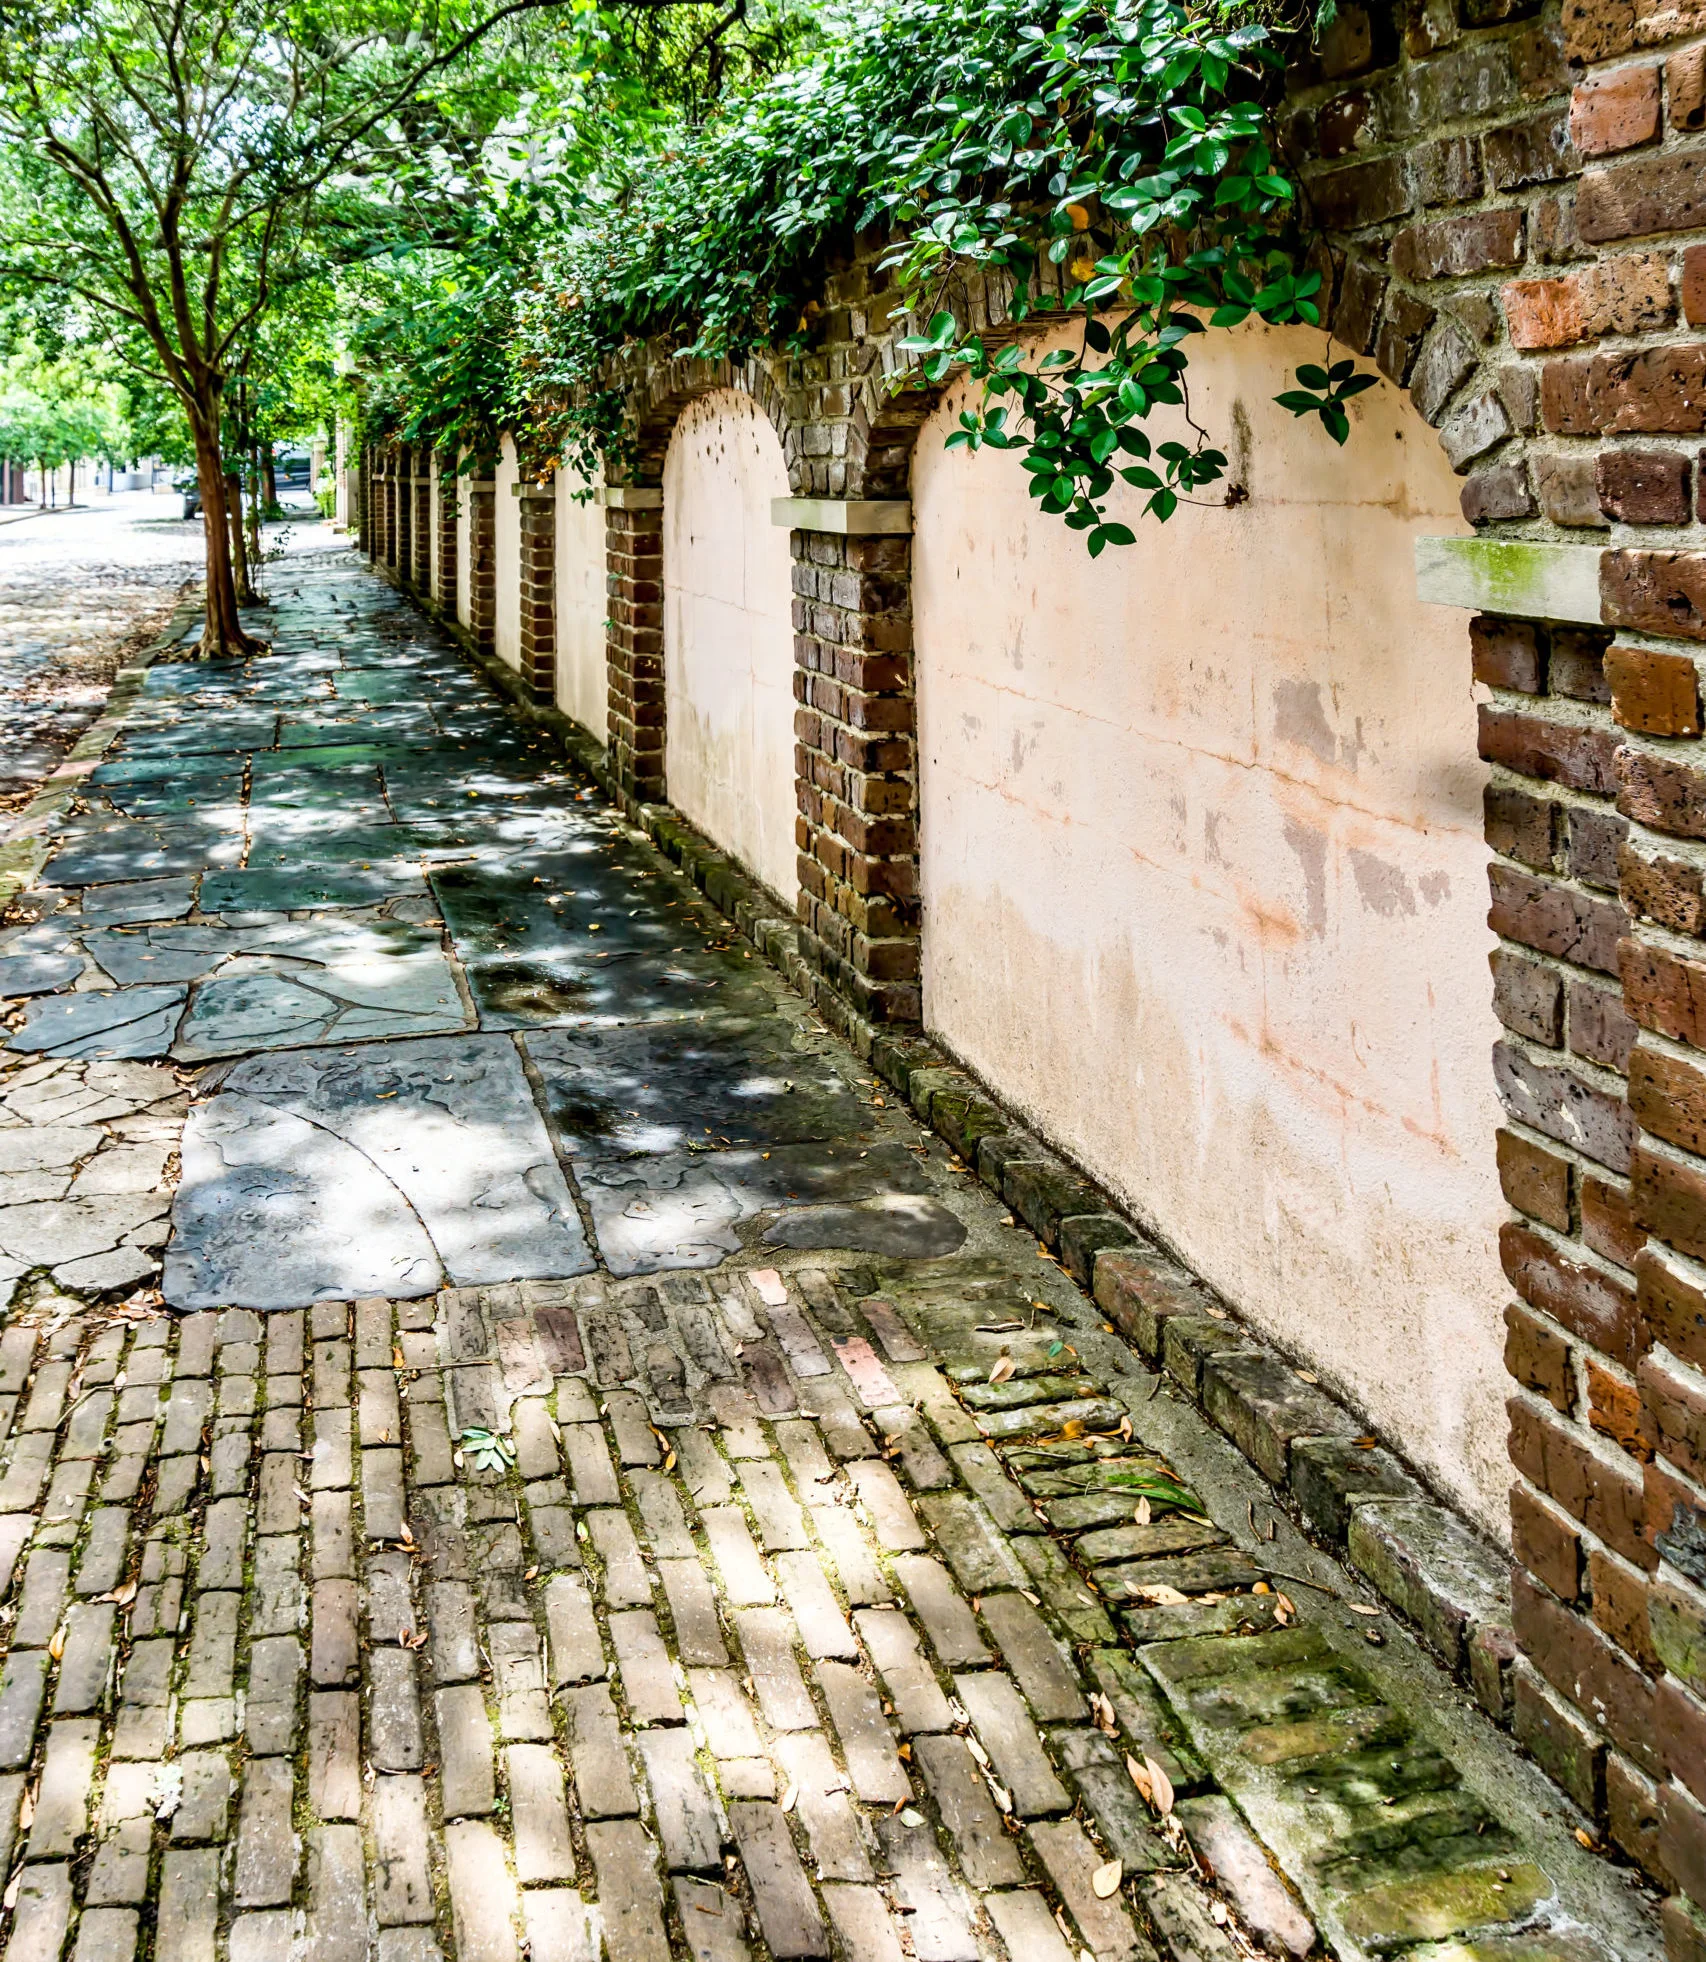 Charleston SC sidewalks can be a danger to walk on. Historic Pavers, slate, stone and other uneven surfaces contribute to slip, trip, and fall injuries.